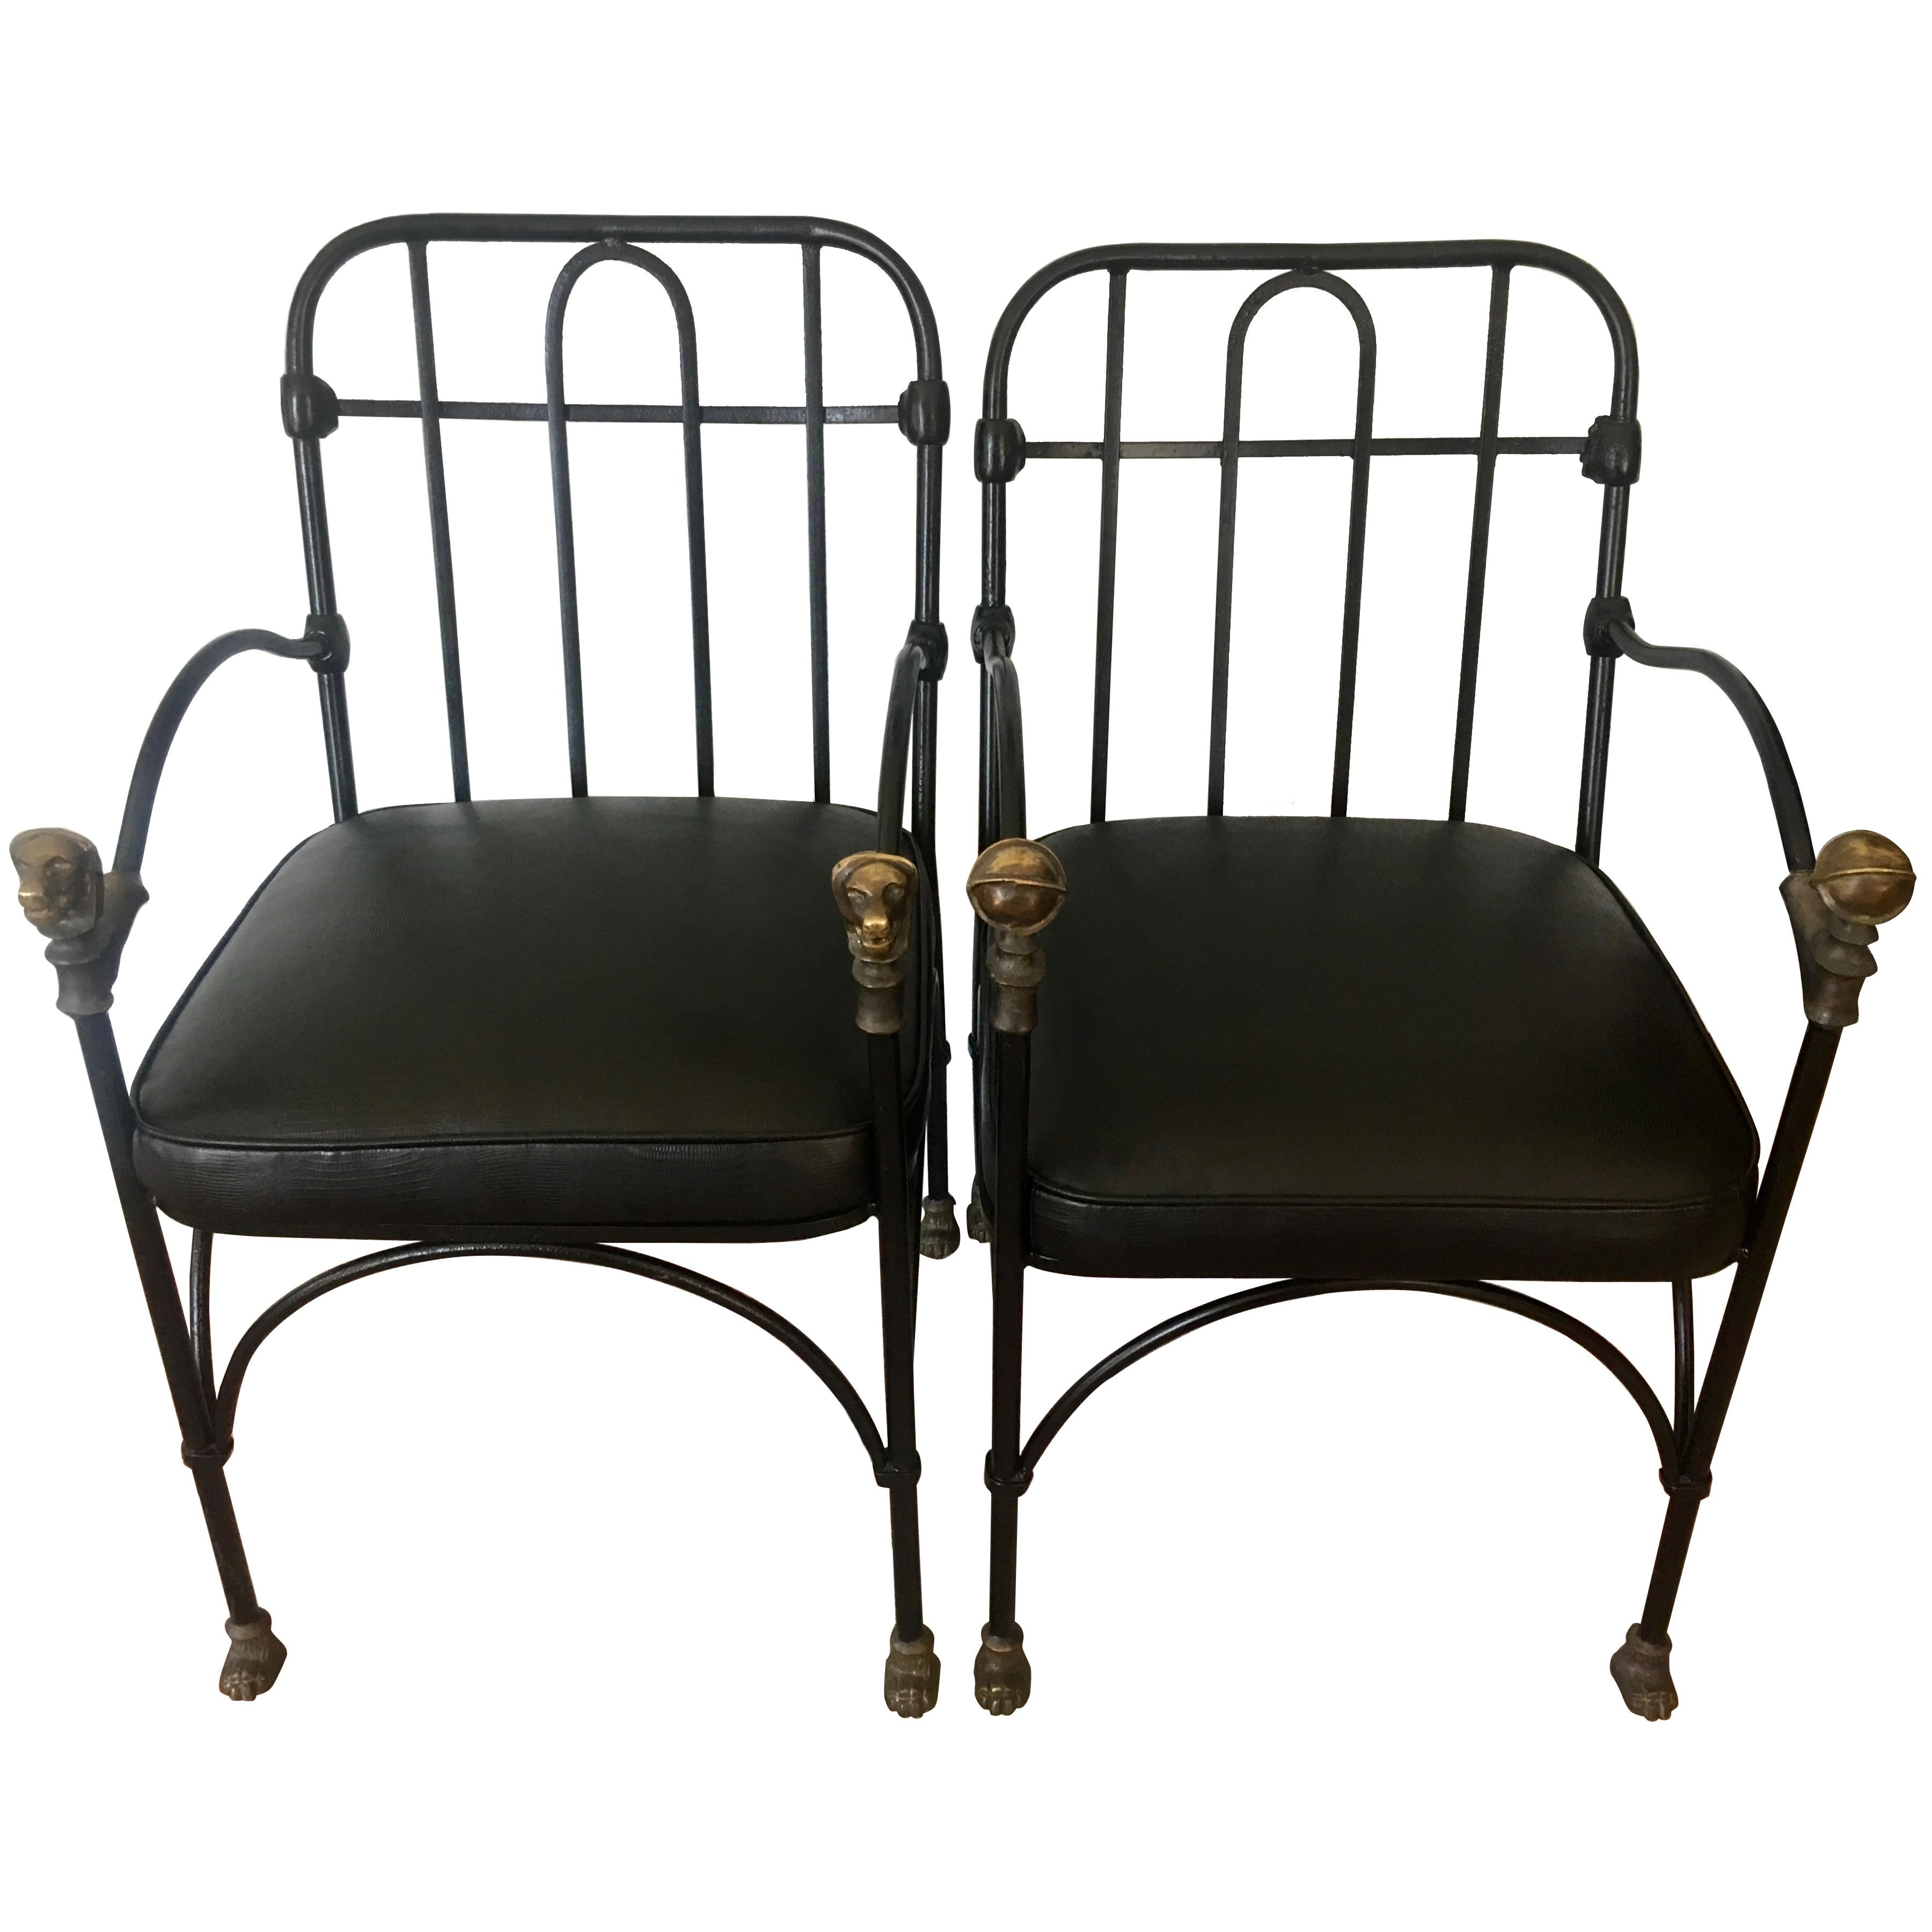 Pair of wrought iron and bronze chairs after Giacometti - A handsome pair of chairs in the Manner of Giacometti - each chair has bronze details, however one is a spherical shape and the other a dog (see image details) both have the same style feet.